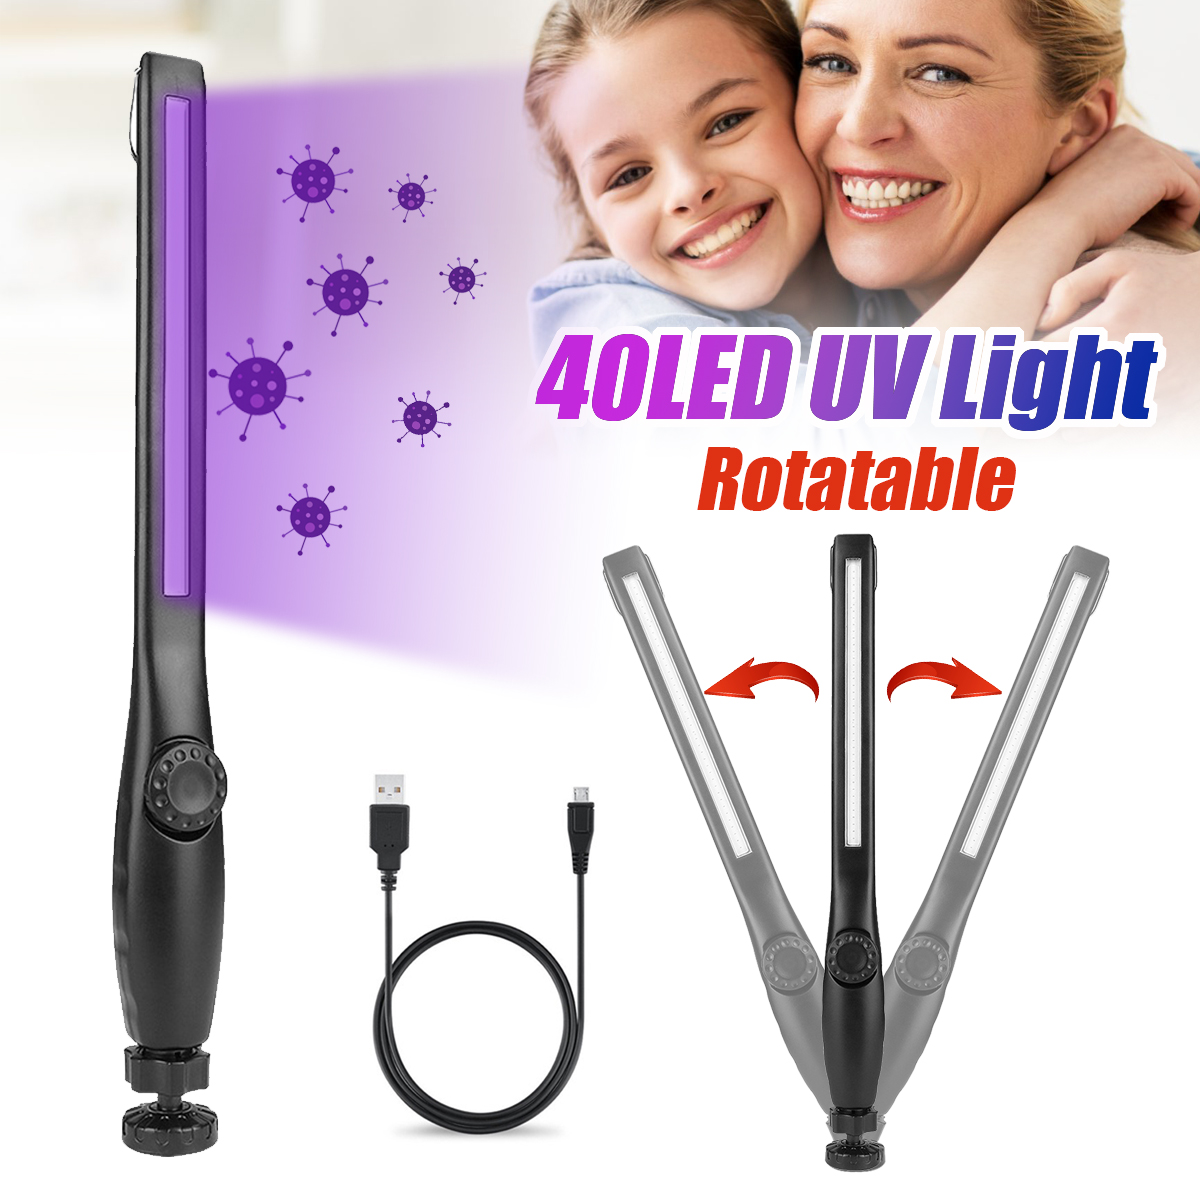 Find USB 40LED Portable Ultraviolet Sterilizer Light Handheld UV Disinfection Lamp for Sale on Gipsybee.com with cryptocurrencies